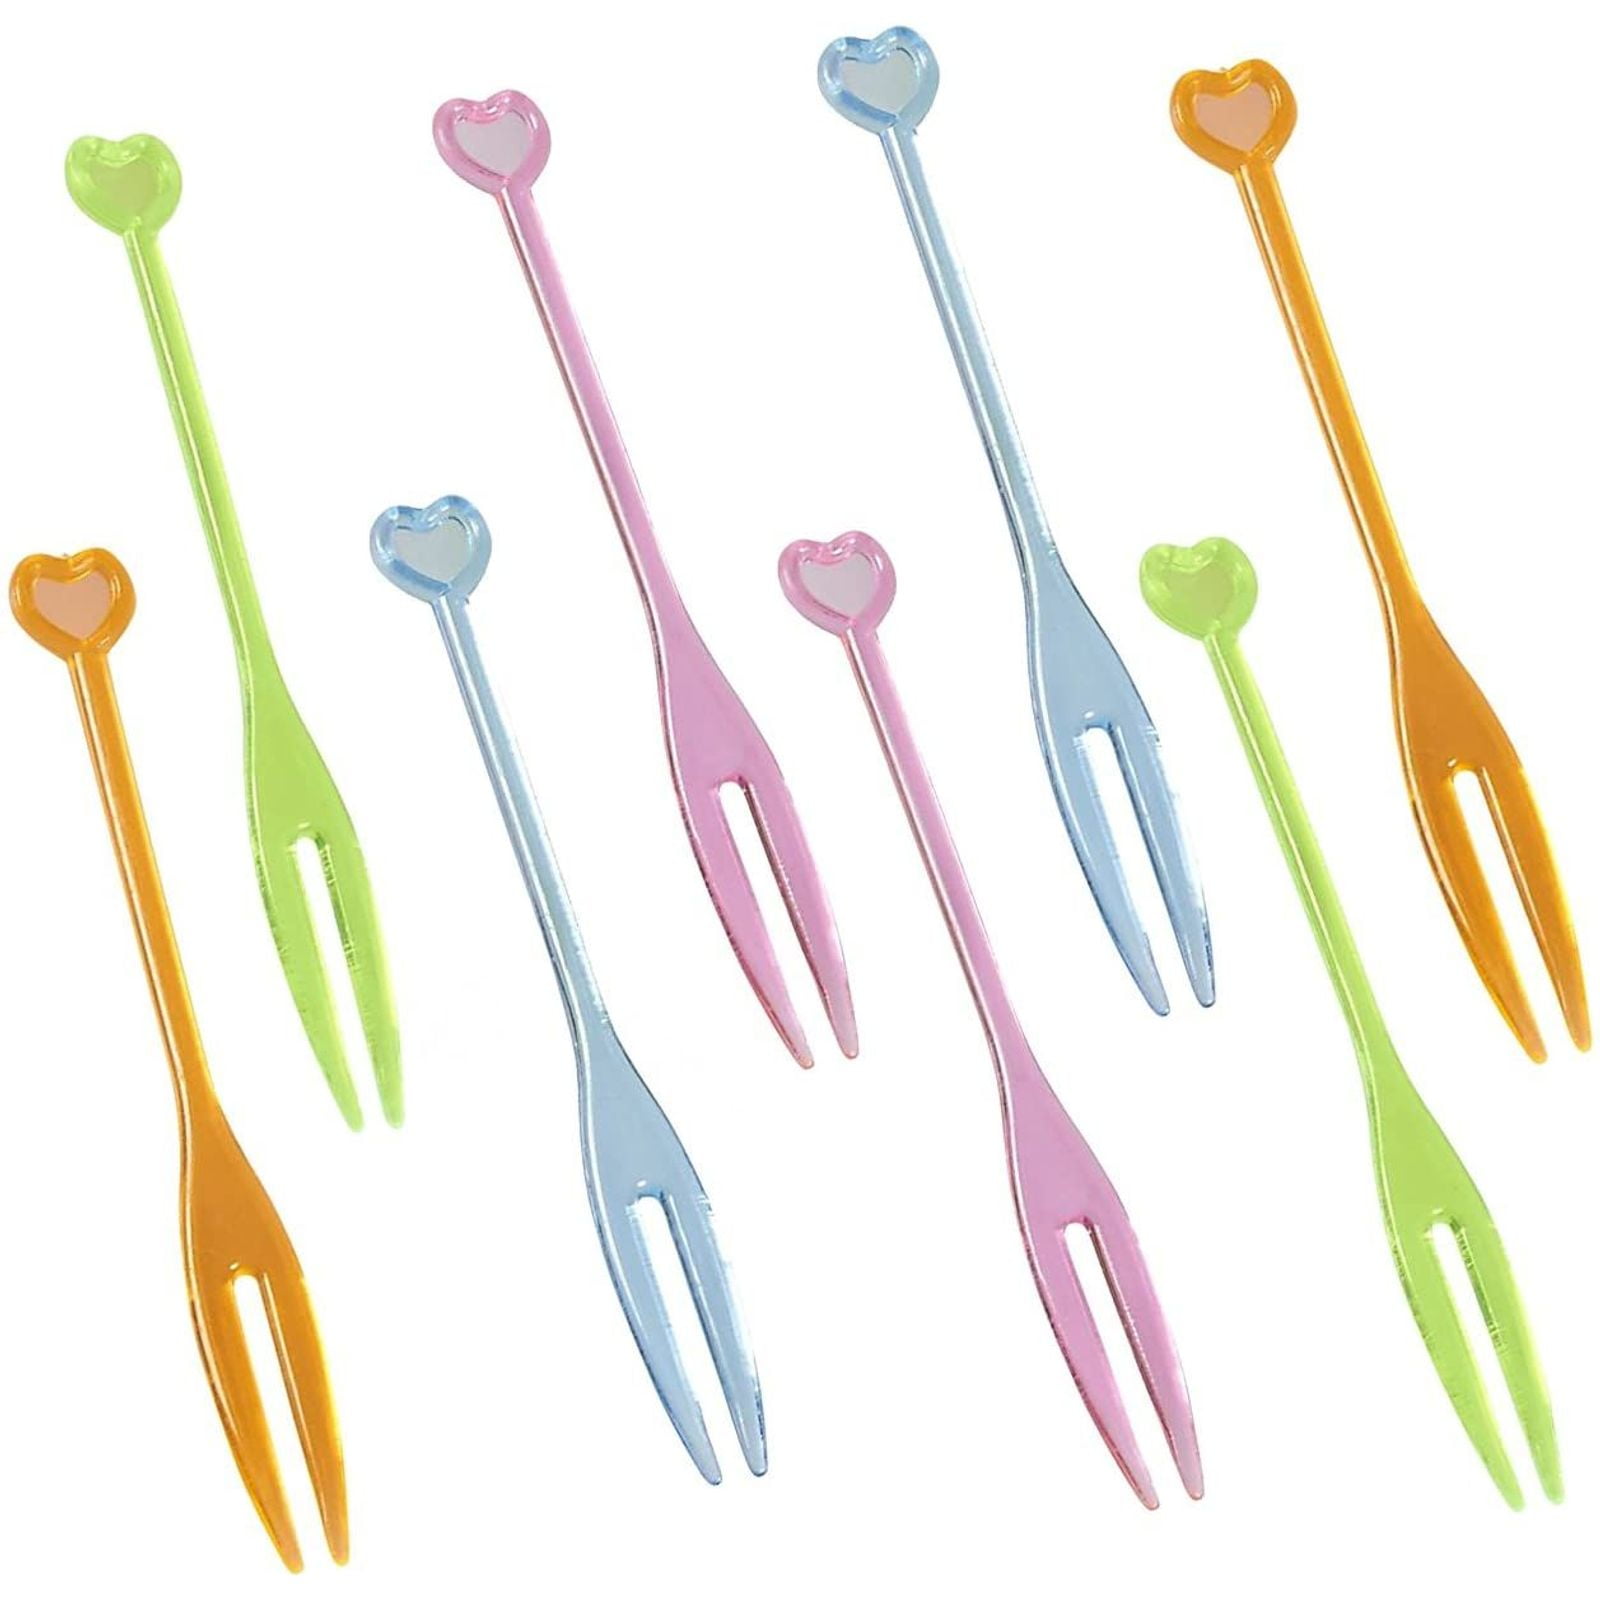 Plastic Cocktail Picks 500 Pieces of Disposable Fruit Forks Party Supplies for Dessert Heart Shape Appetizer and Drinks in 4 Assorted Colors 